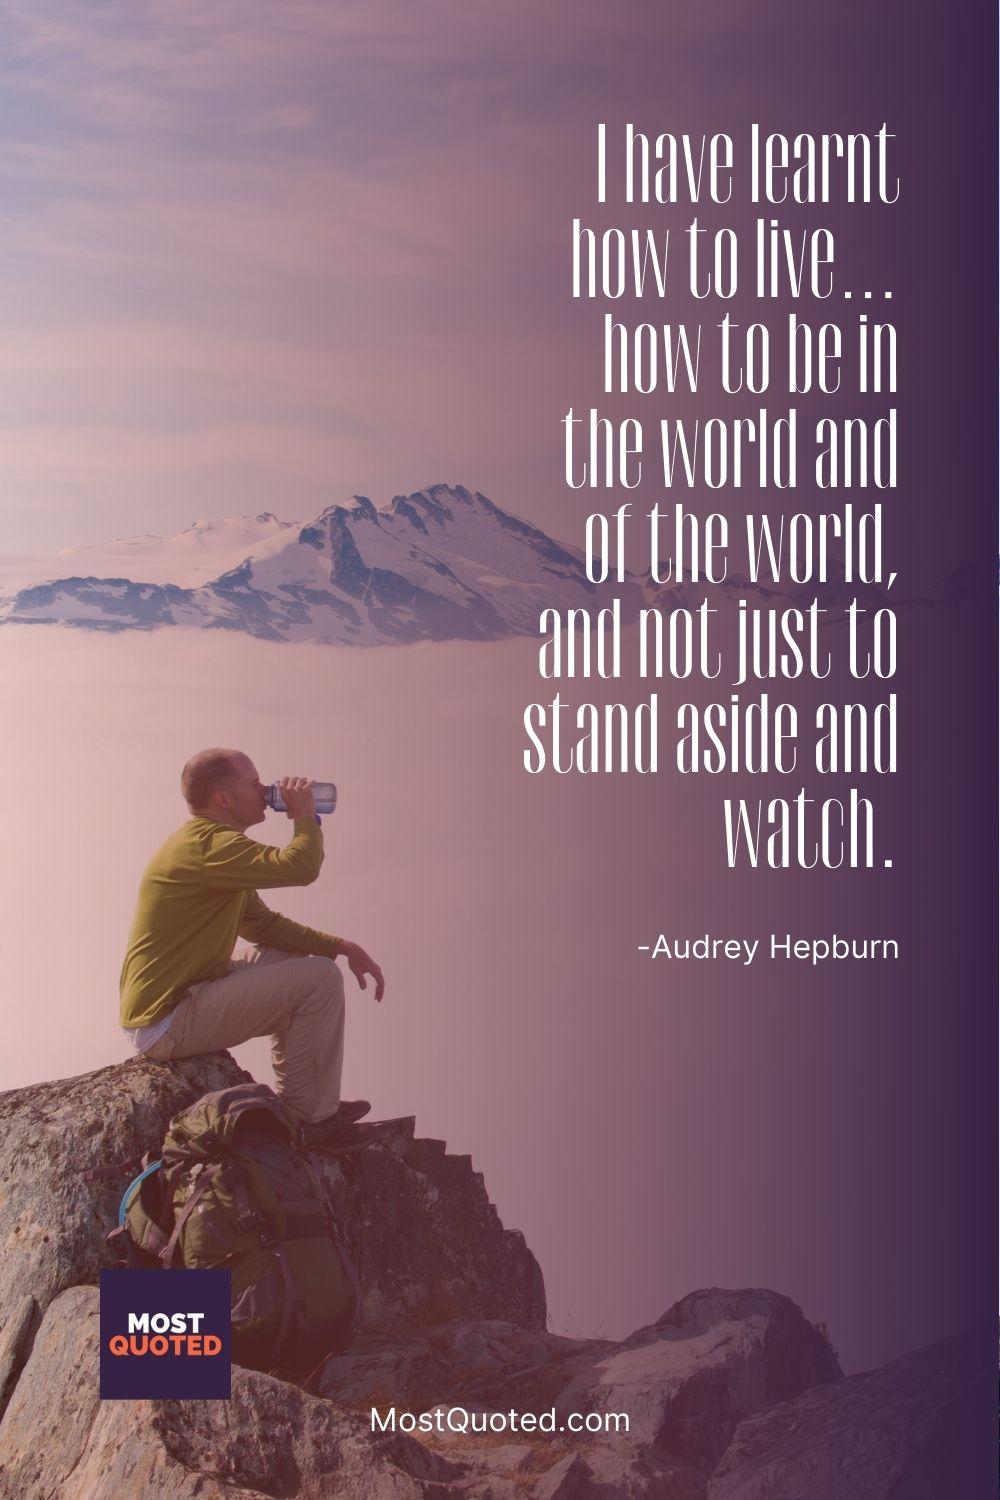 I have learnt how to live… how to be in the world and of the world, and not just to stand aside and watch. - Audrey Hepburn